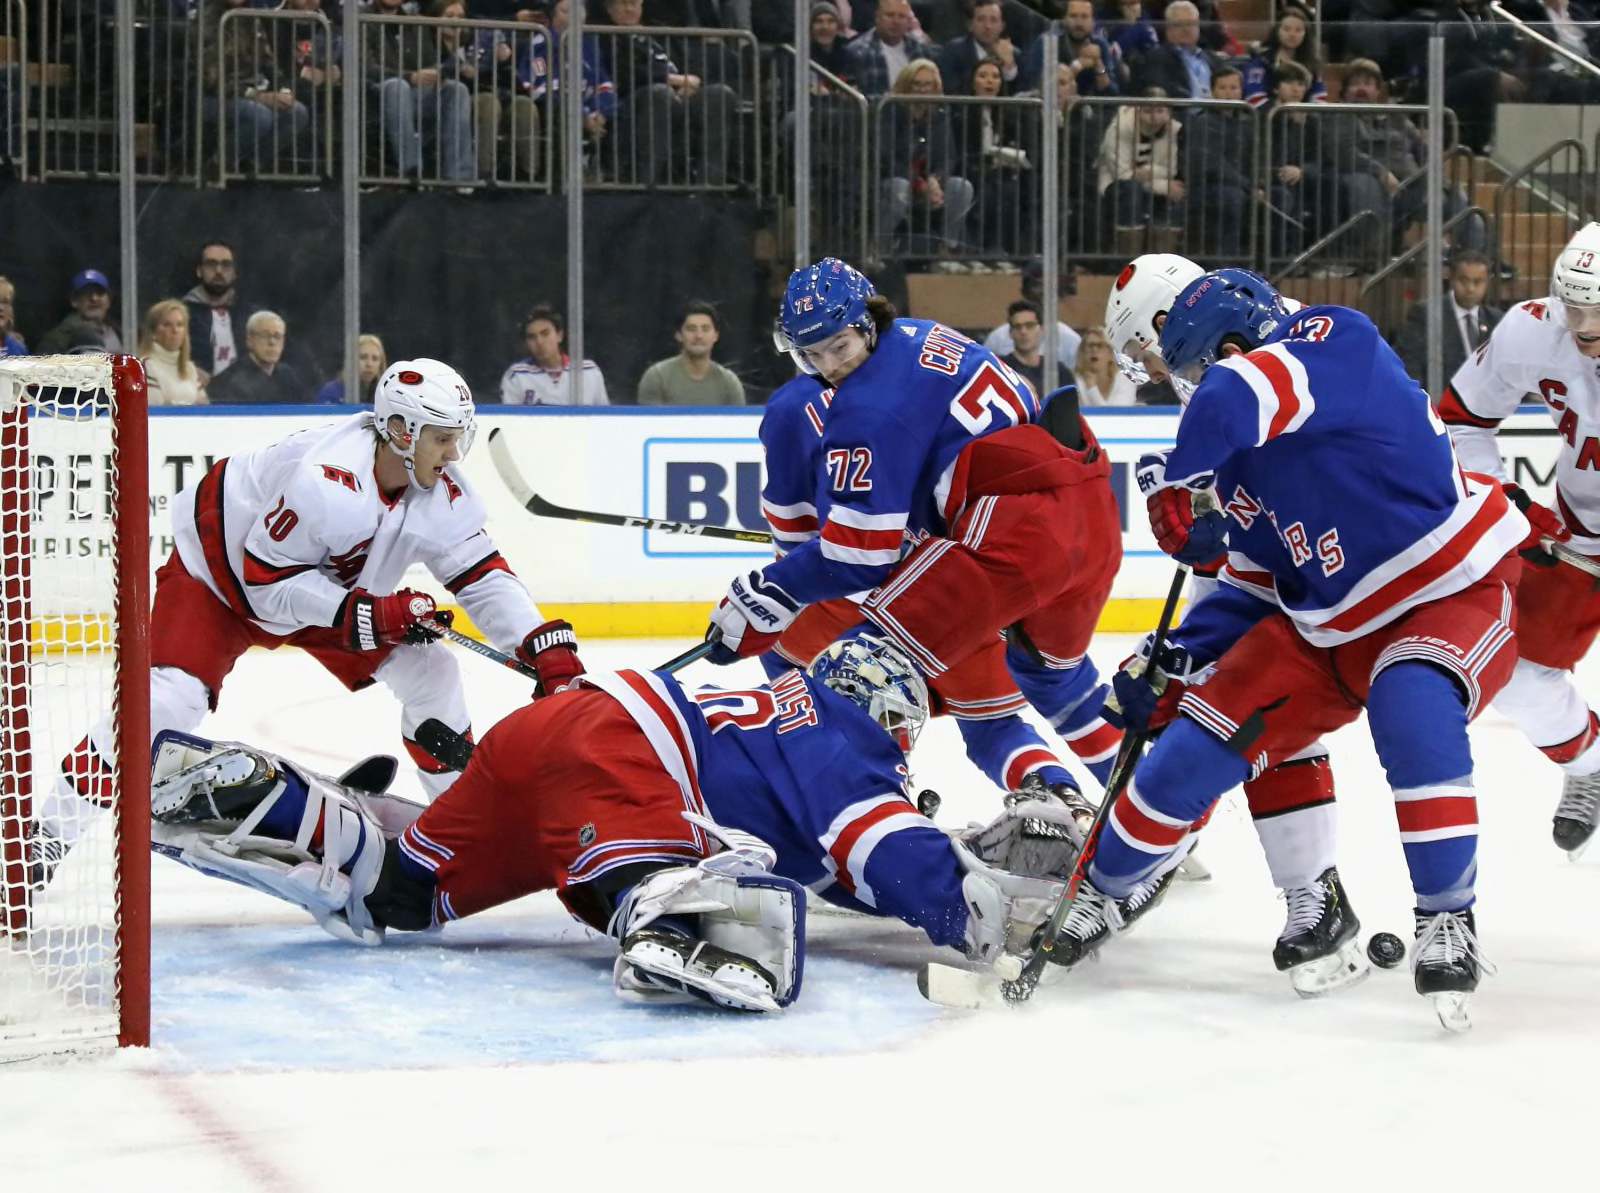 Henrik Lundqvist pictured keeping the puck out of the net surrounded by defenders and Sebastian Aho.